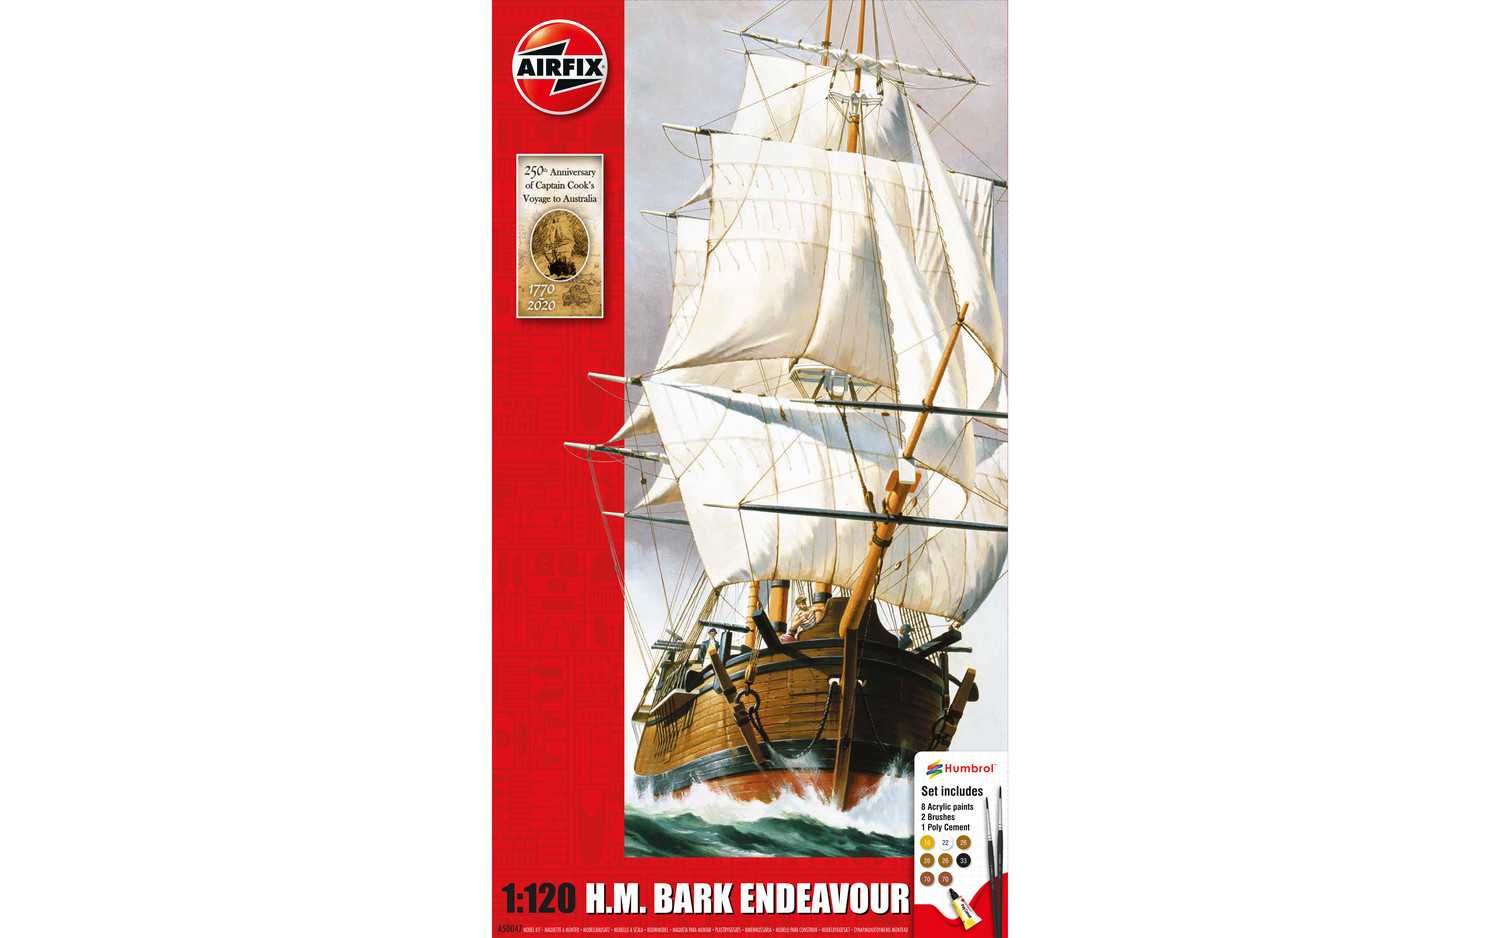 Gift Set lodě A50047 - Endeavour Bark and Captain Cook 250th anniversary (1:120)